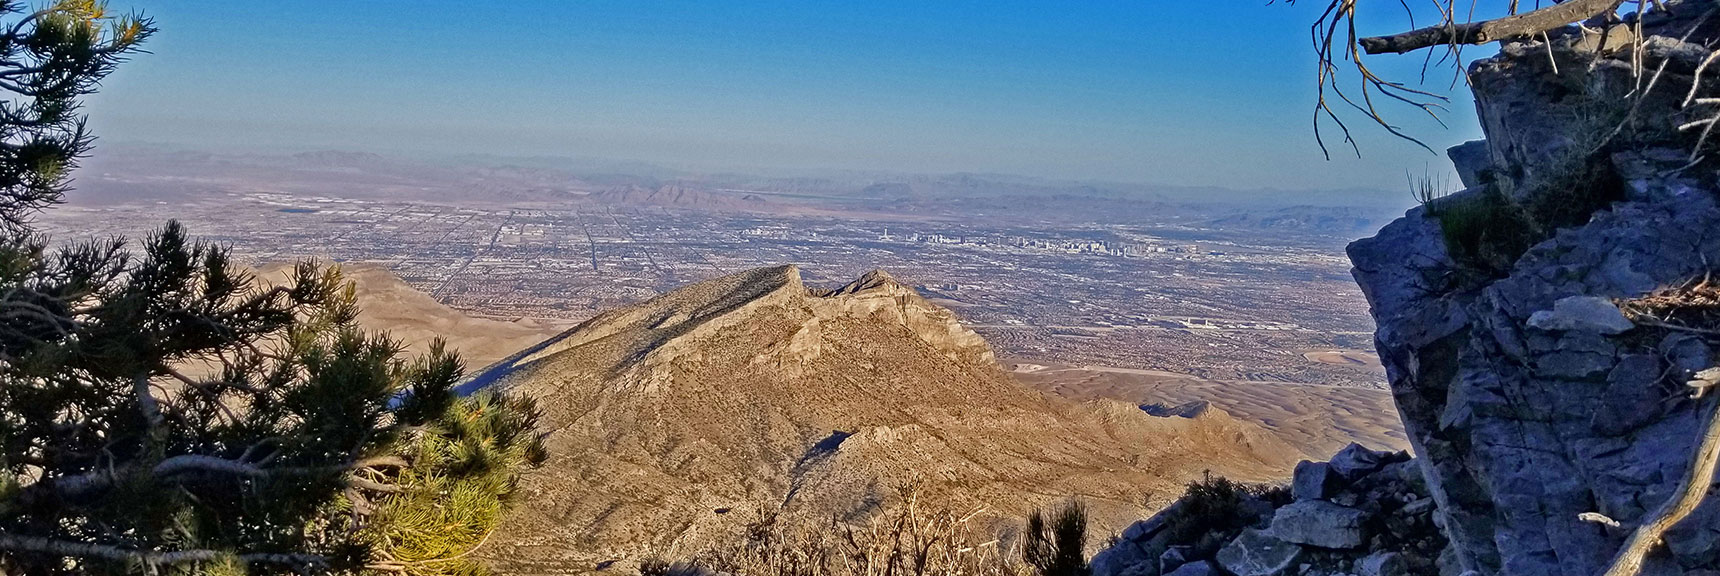 Damsel Peak and Las Vegas Valley from Notch Between La Madre and El Padre Mts | La Madre Mountain,, El Padre Mountain, Burnt Peak | La Madre Mountains Wilderness, Nevada